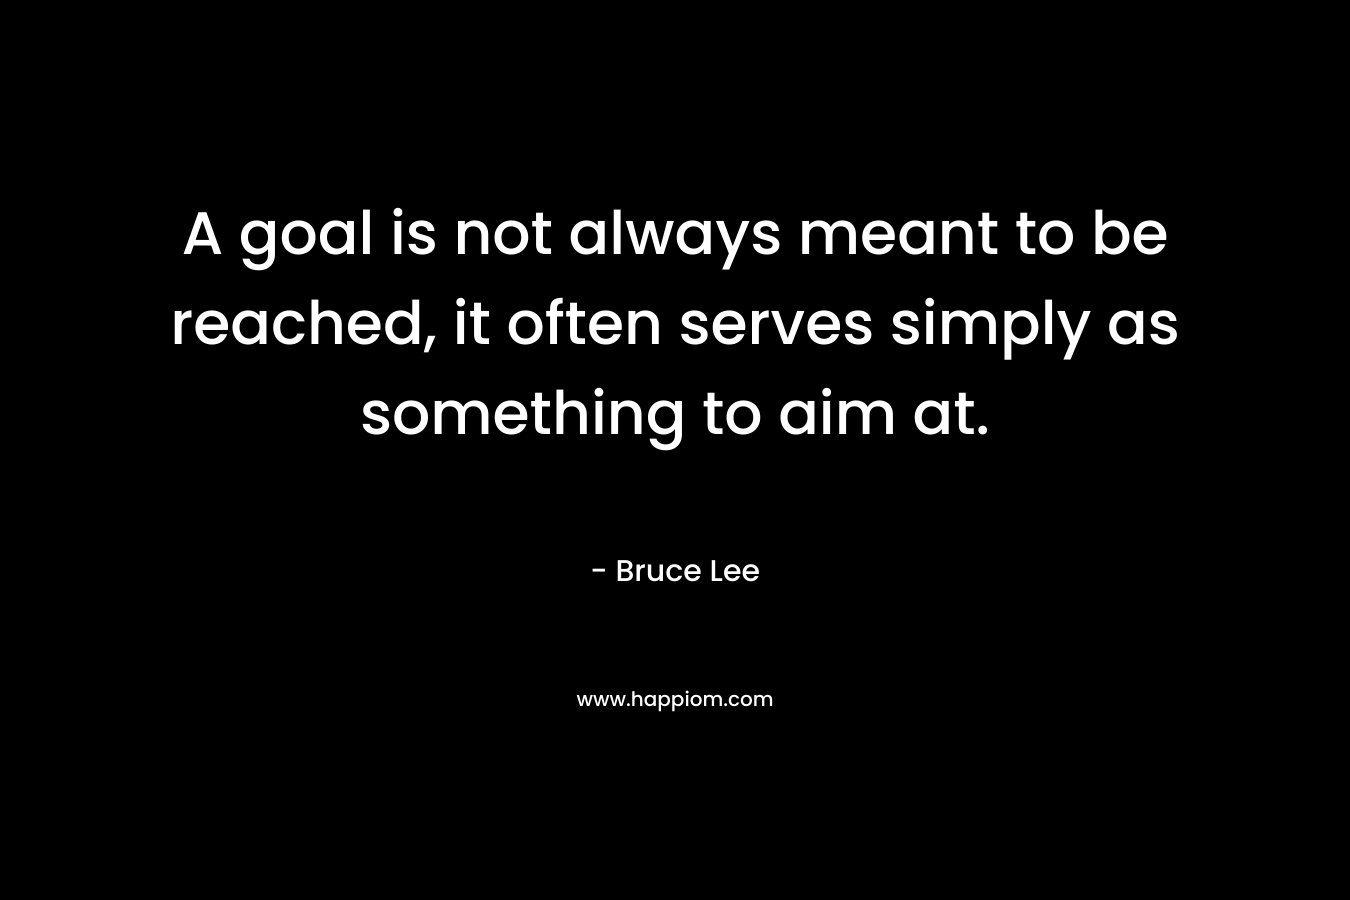 A goal is not always meant to be reached, it often serves simply as something to aim at. – Bruce Lee